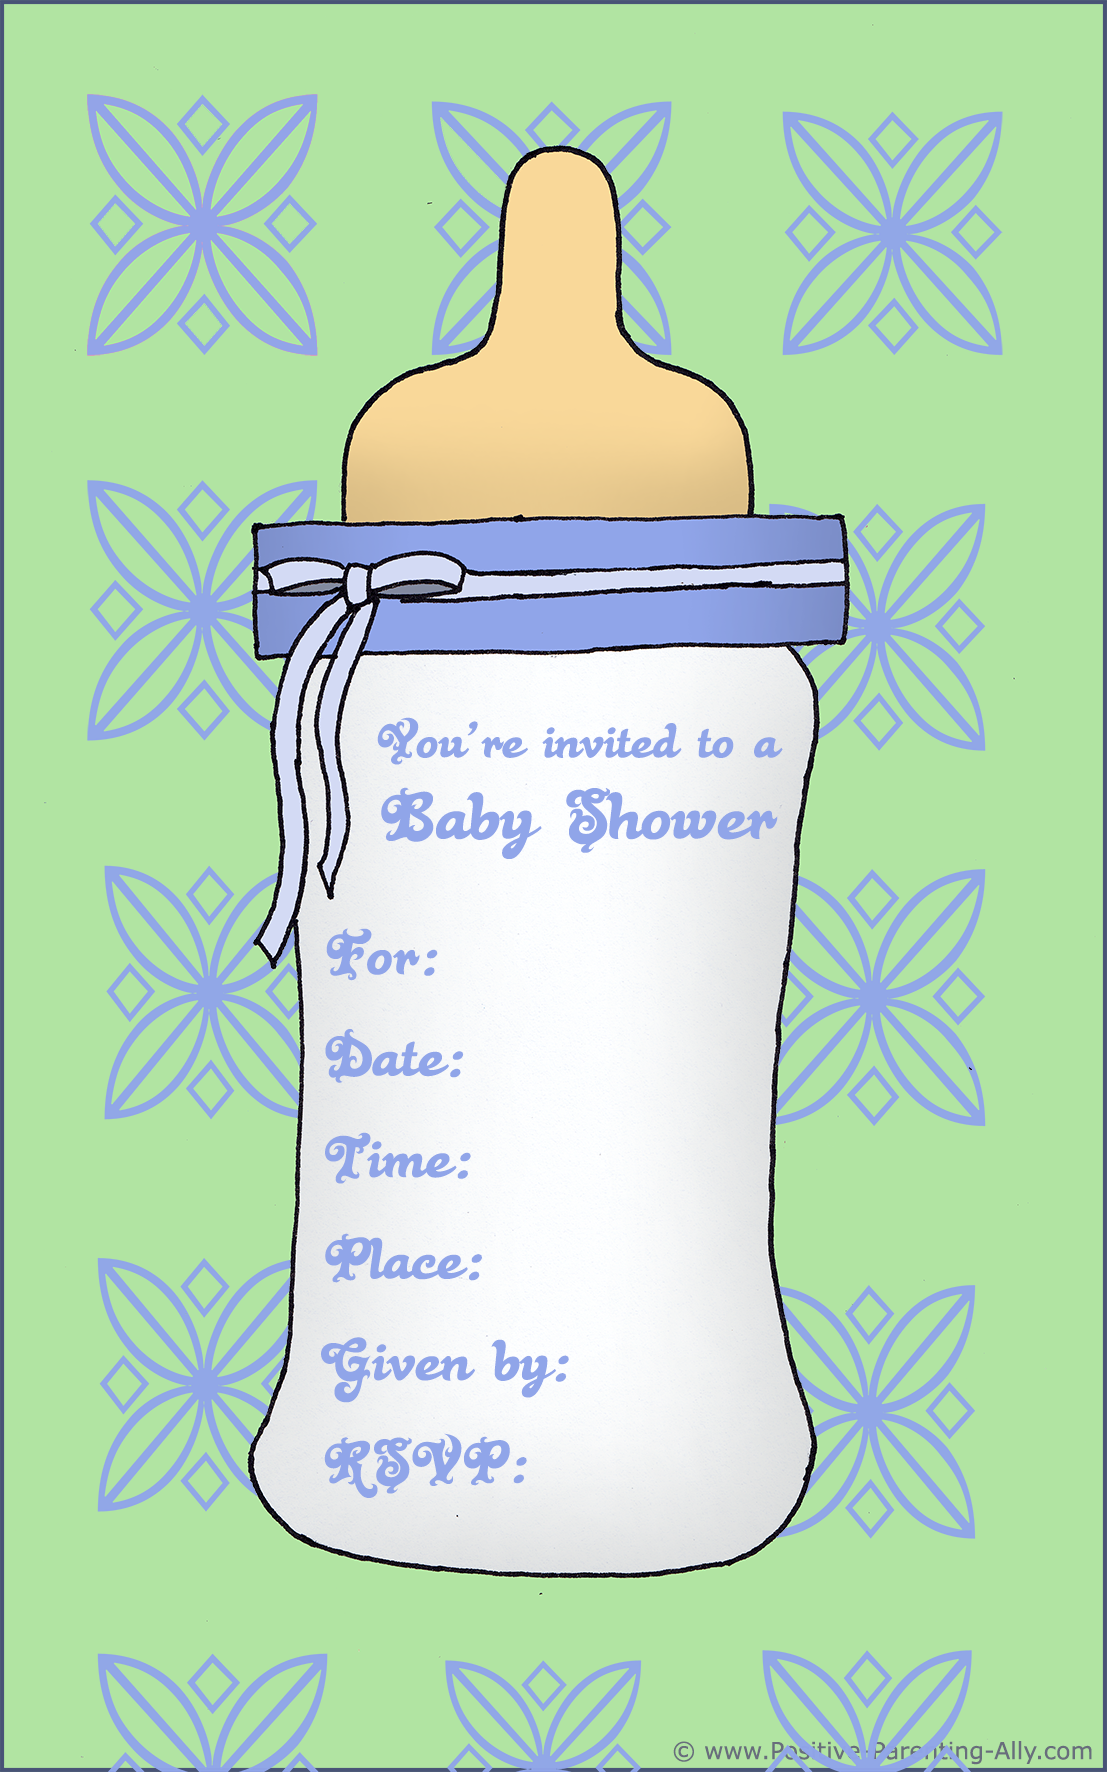 baby-showers-ideas-themes-games-gifts-boys-baby-shower-invitations